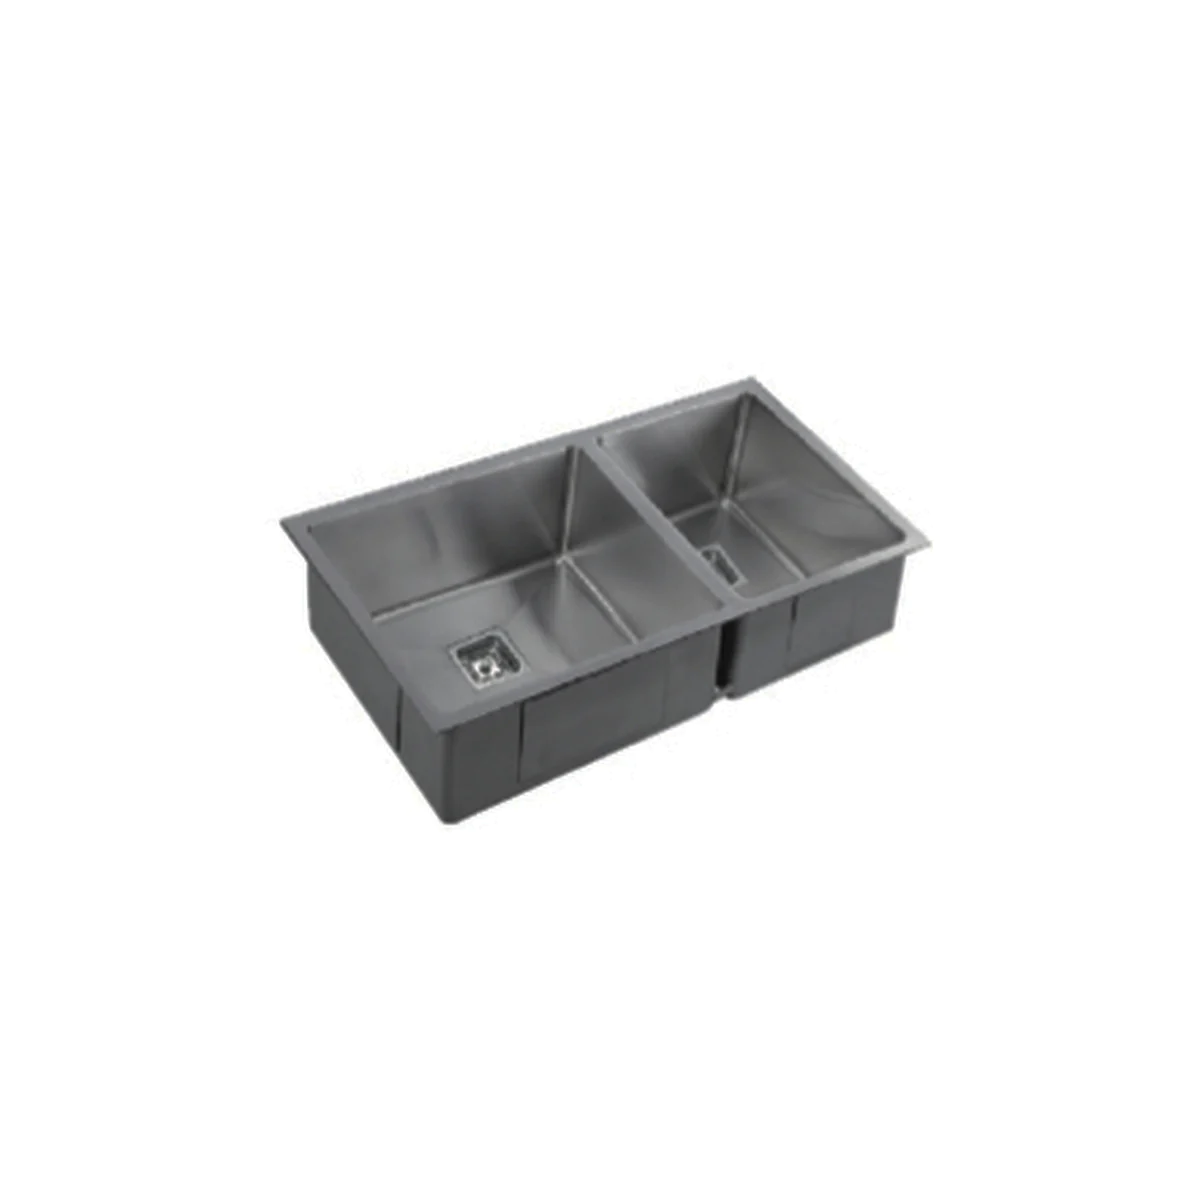 VEROTTI INOX 1 3/4 BOWL UNIVERSAL STAINLESS STEEL KITCHEN SINK GUN METAL 765MM (AVAILABLE IN LEFT OR RIGHT CONFIGURATION)